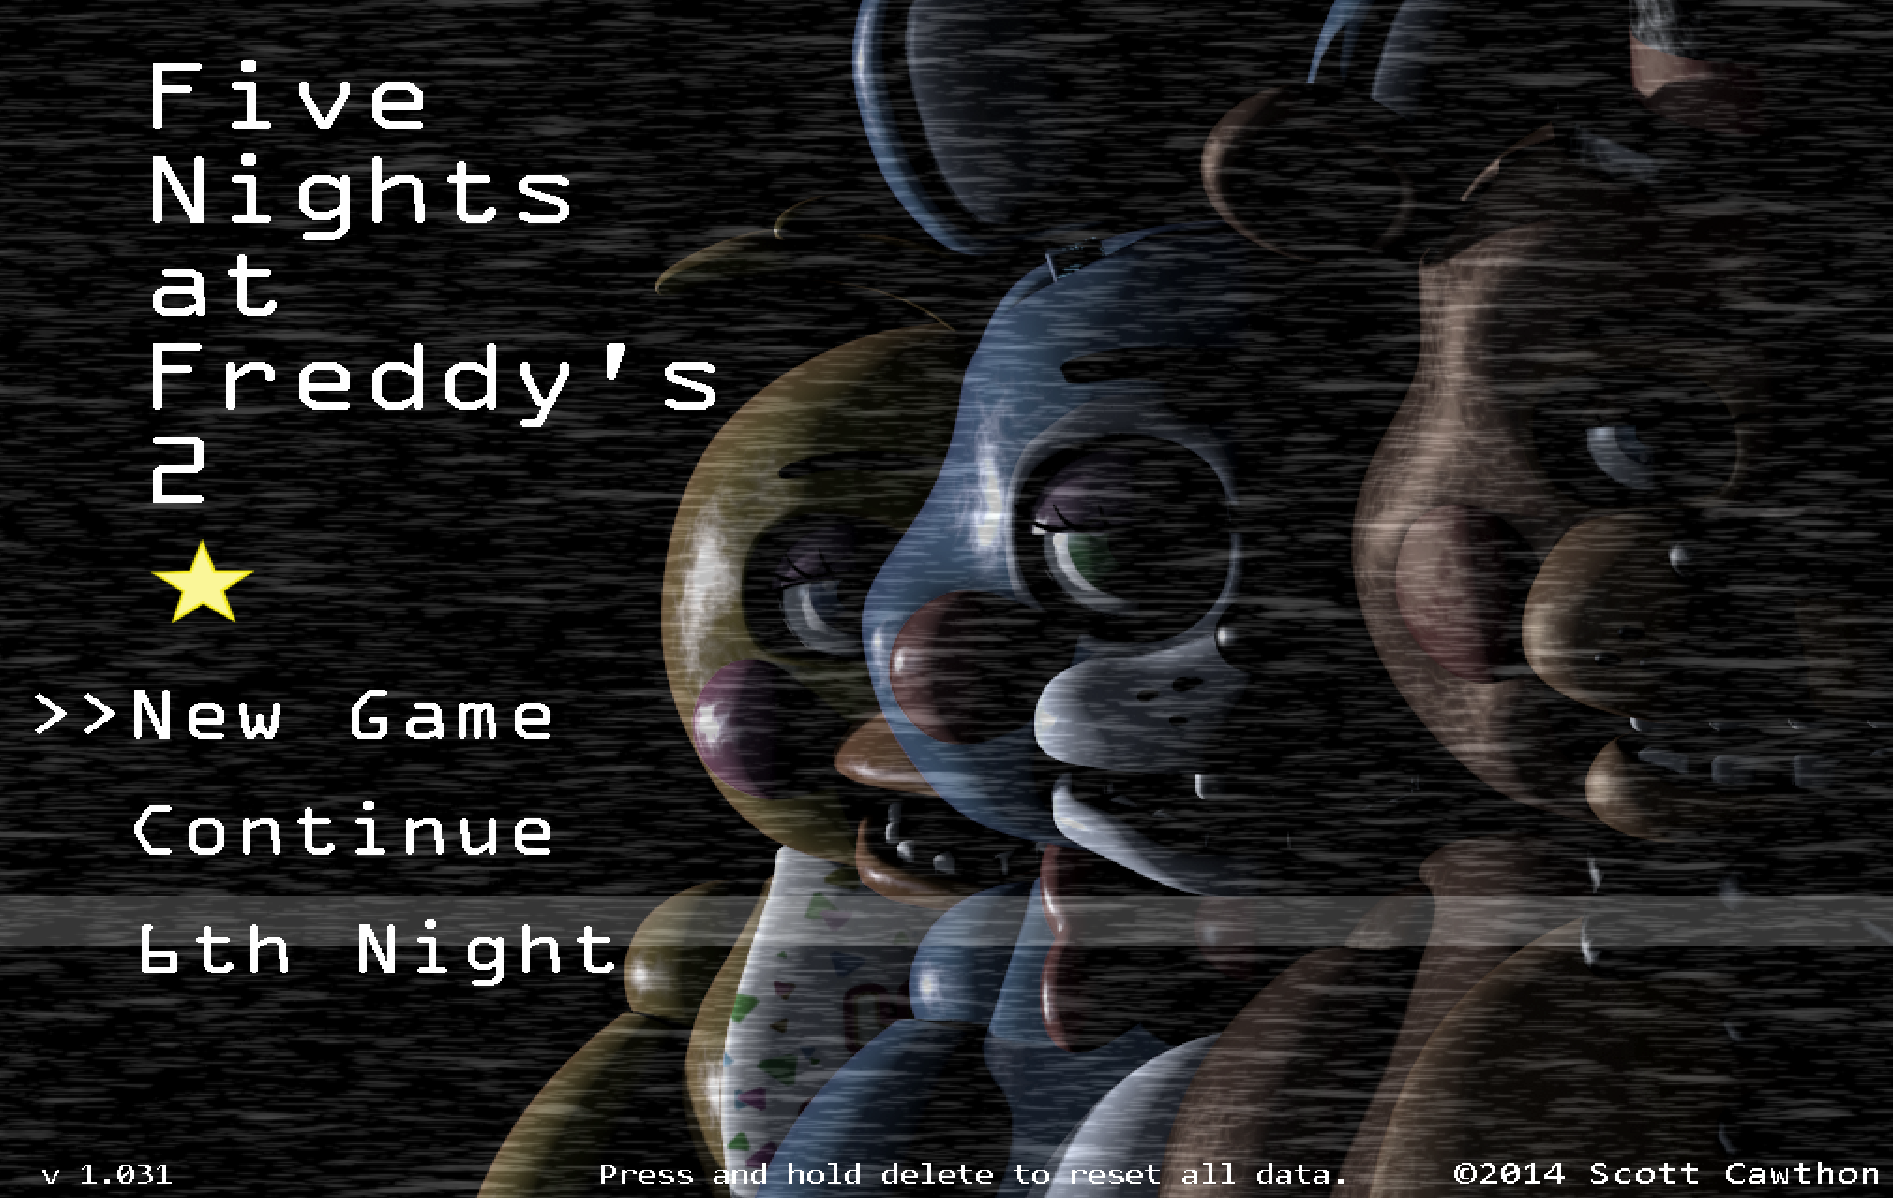 WELCOME TO THE FAMILY  Five Nights at Freddy's 2 - Part 5 